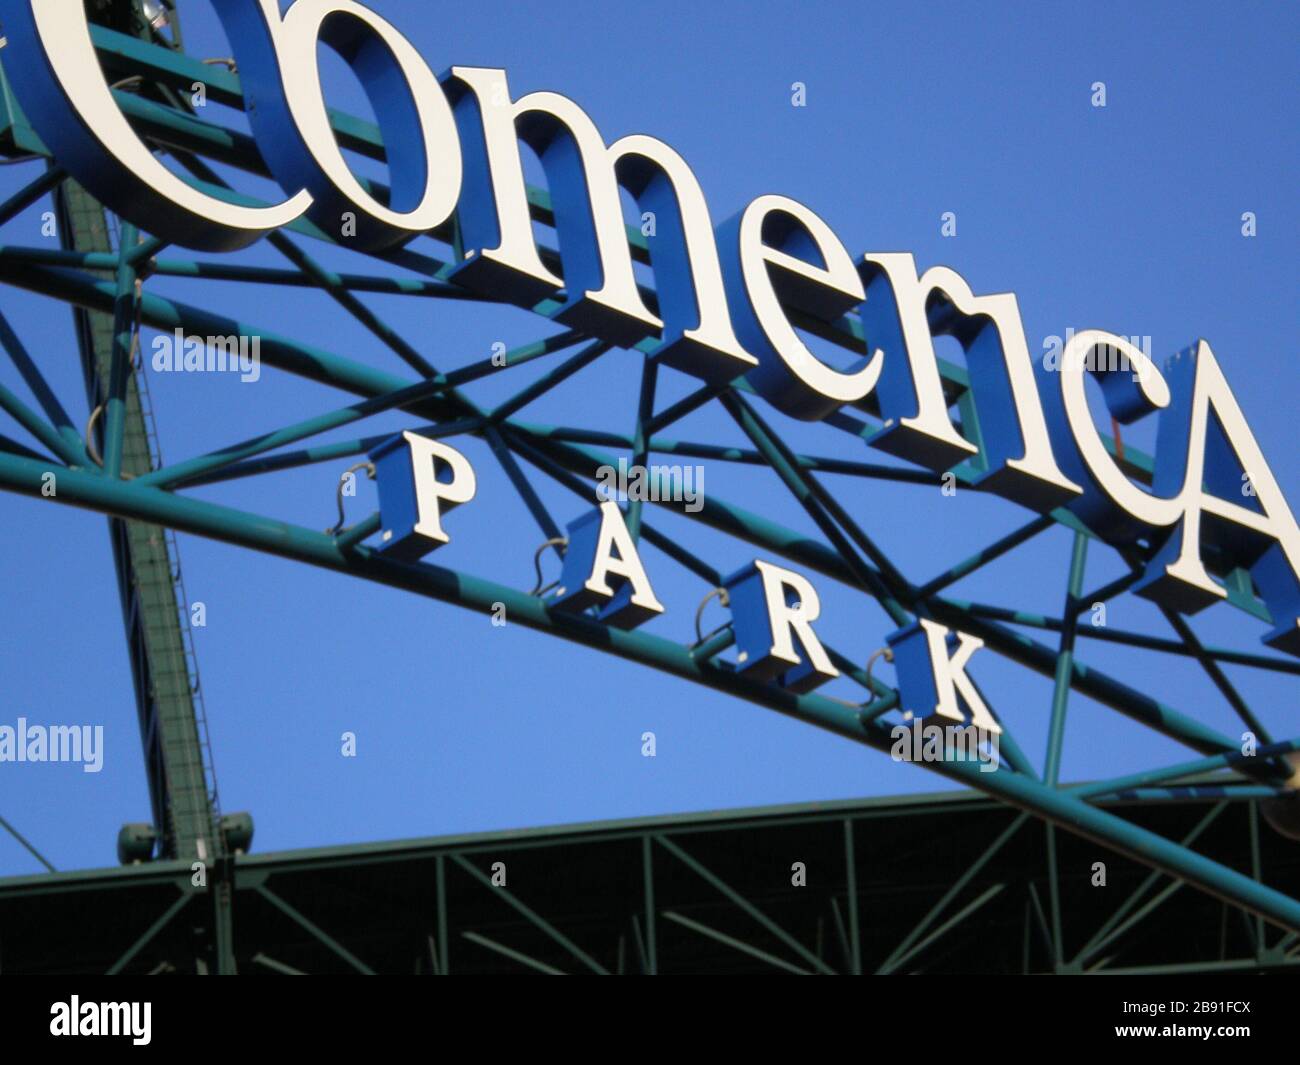 White Sox Park High Resolution Stock Photography And Images Alamy